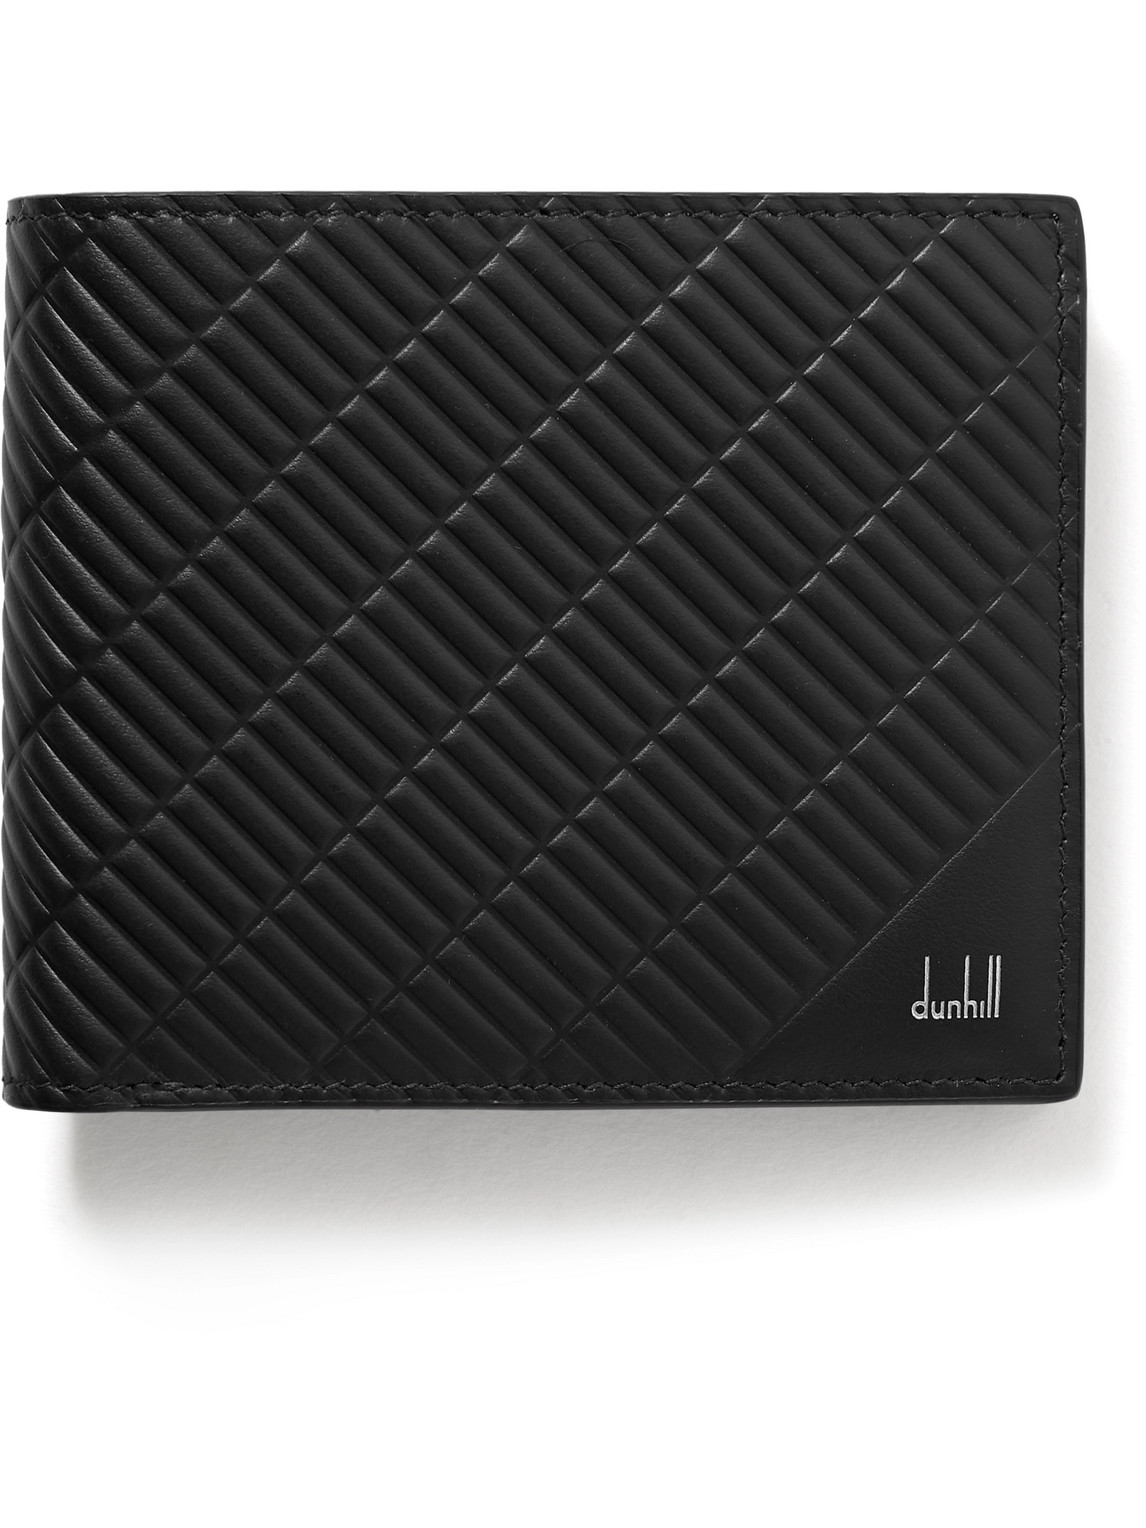 Dunhill Contour Quilted Leather Billfold Wallet In Black